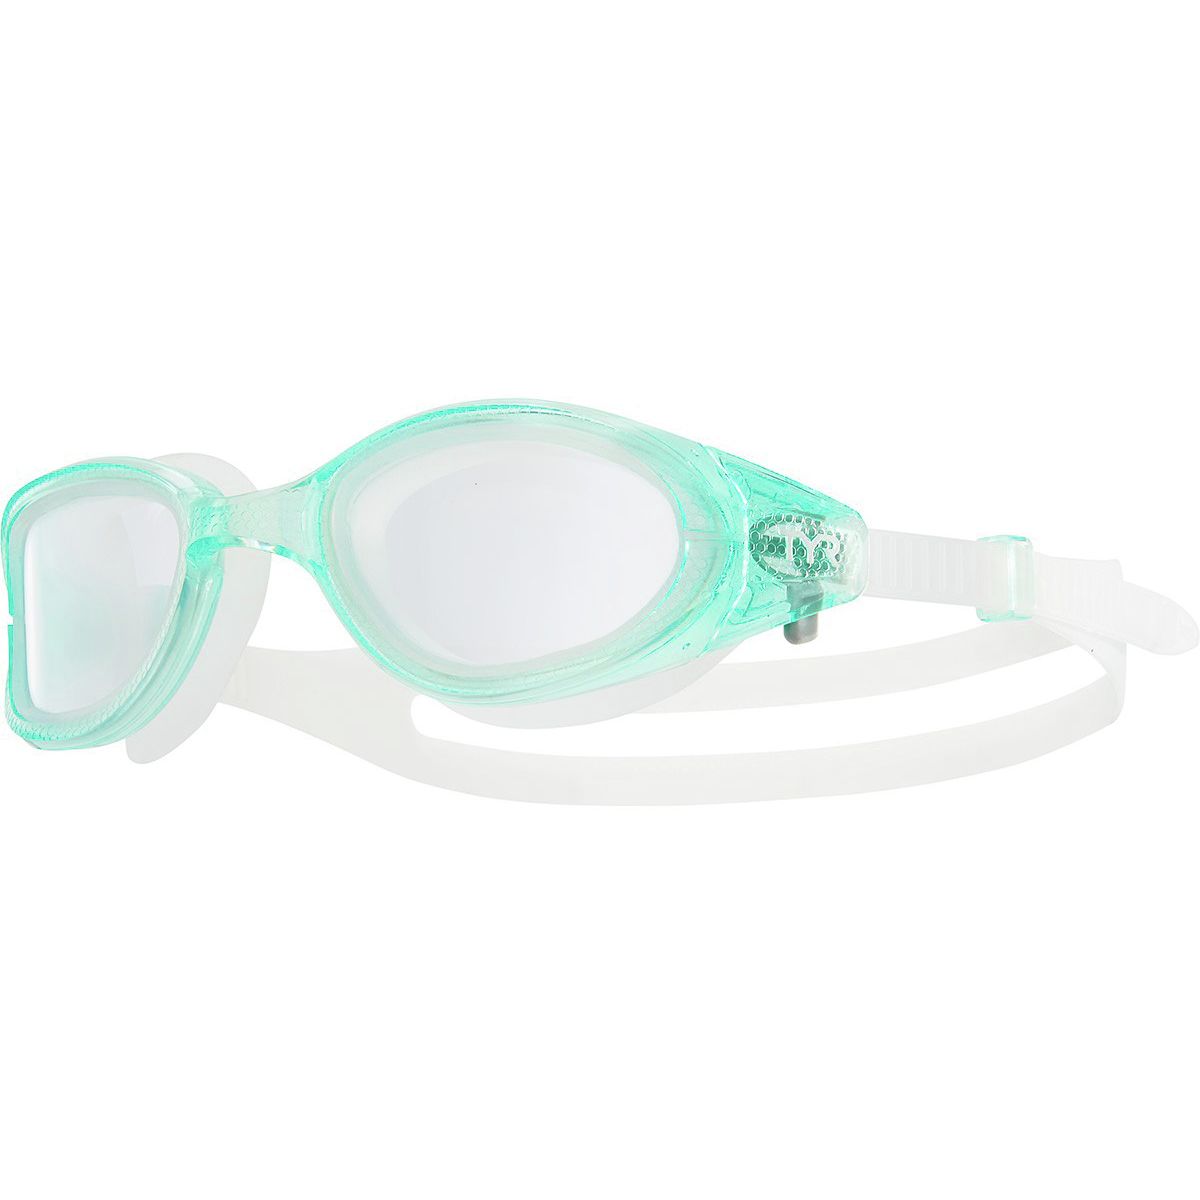 TYR Special Ops 3.0 Transition Femme Swim Goggles